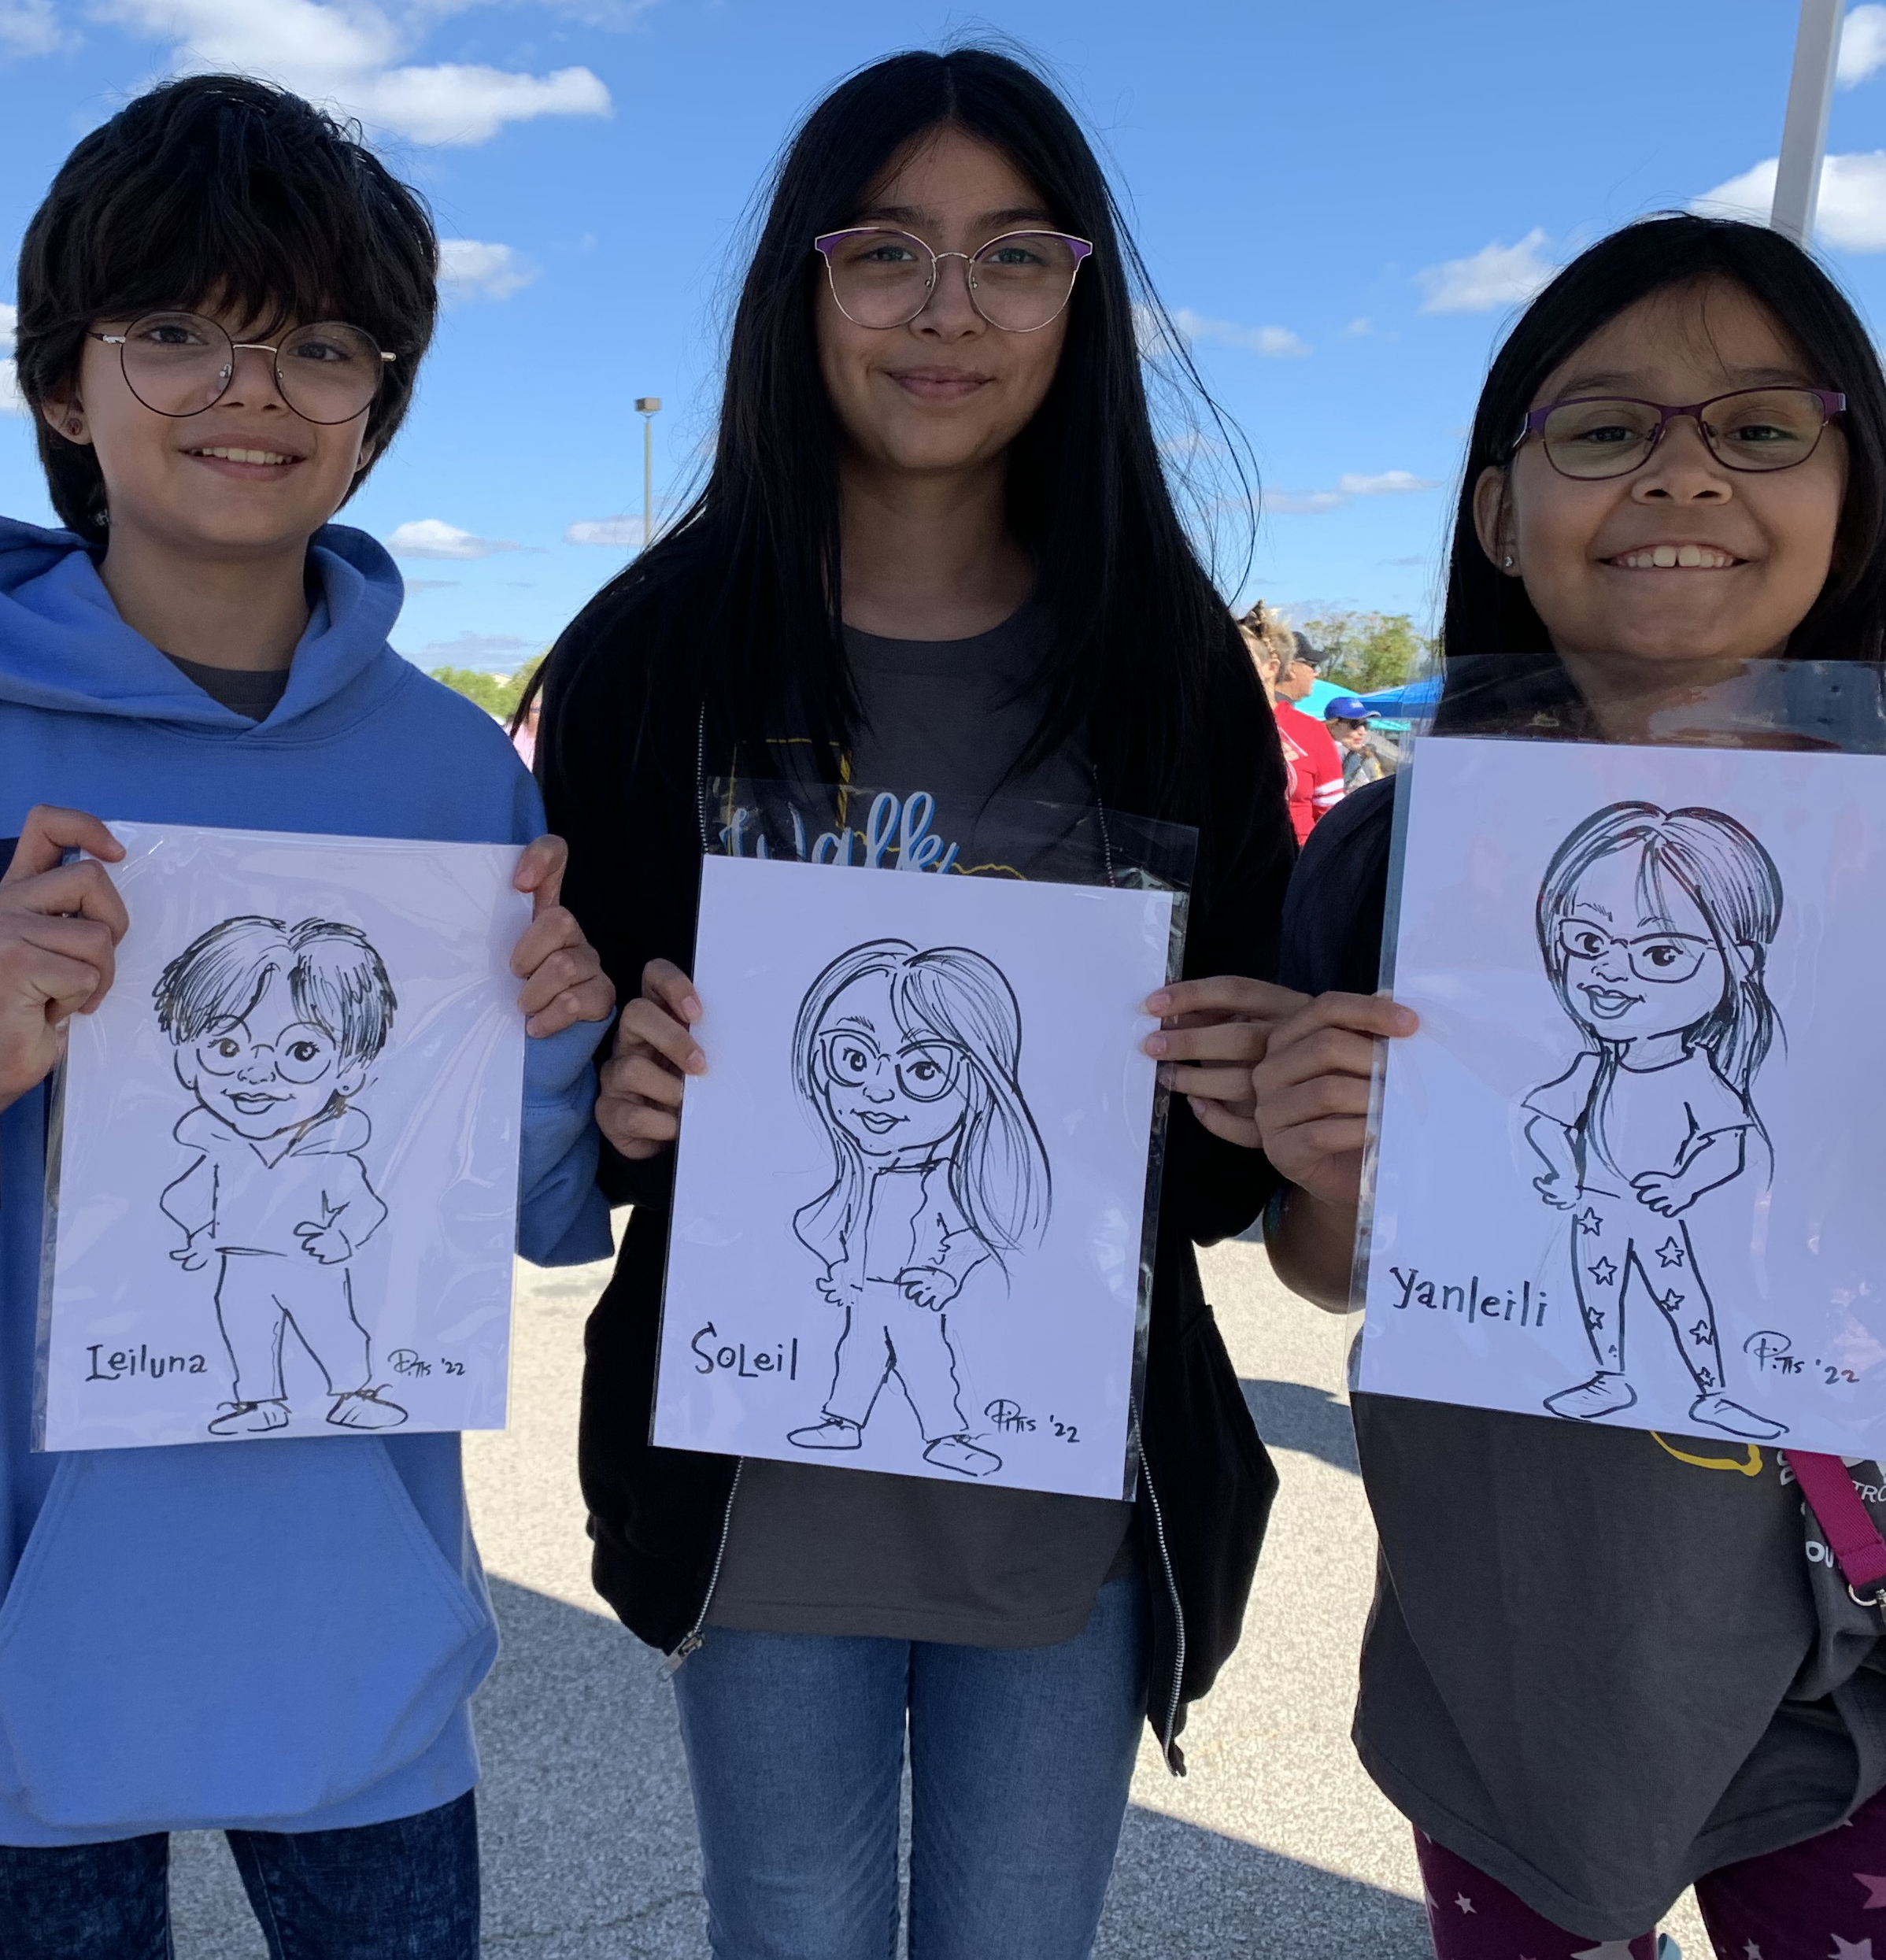 three young sisters smiling holding a cartoon caricature of themselves